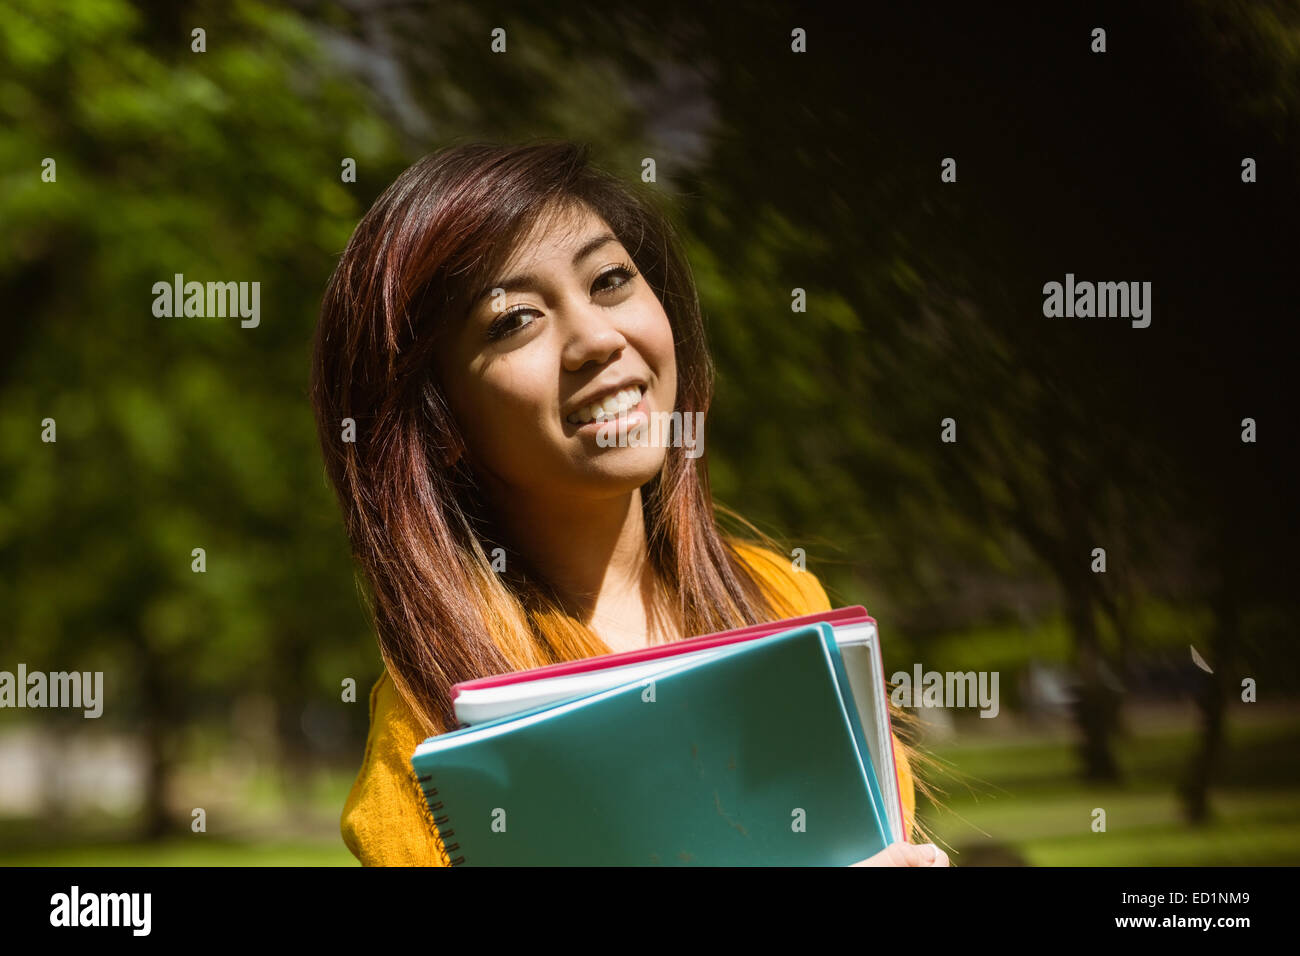 Female college student with books in park Stock Photo